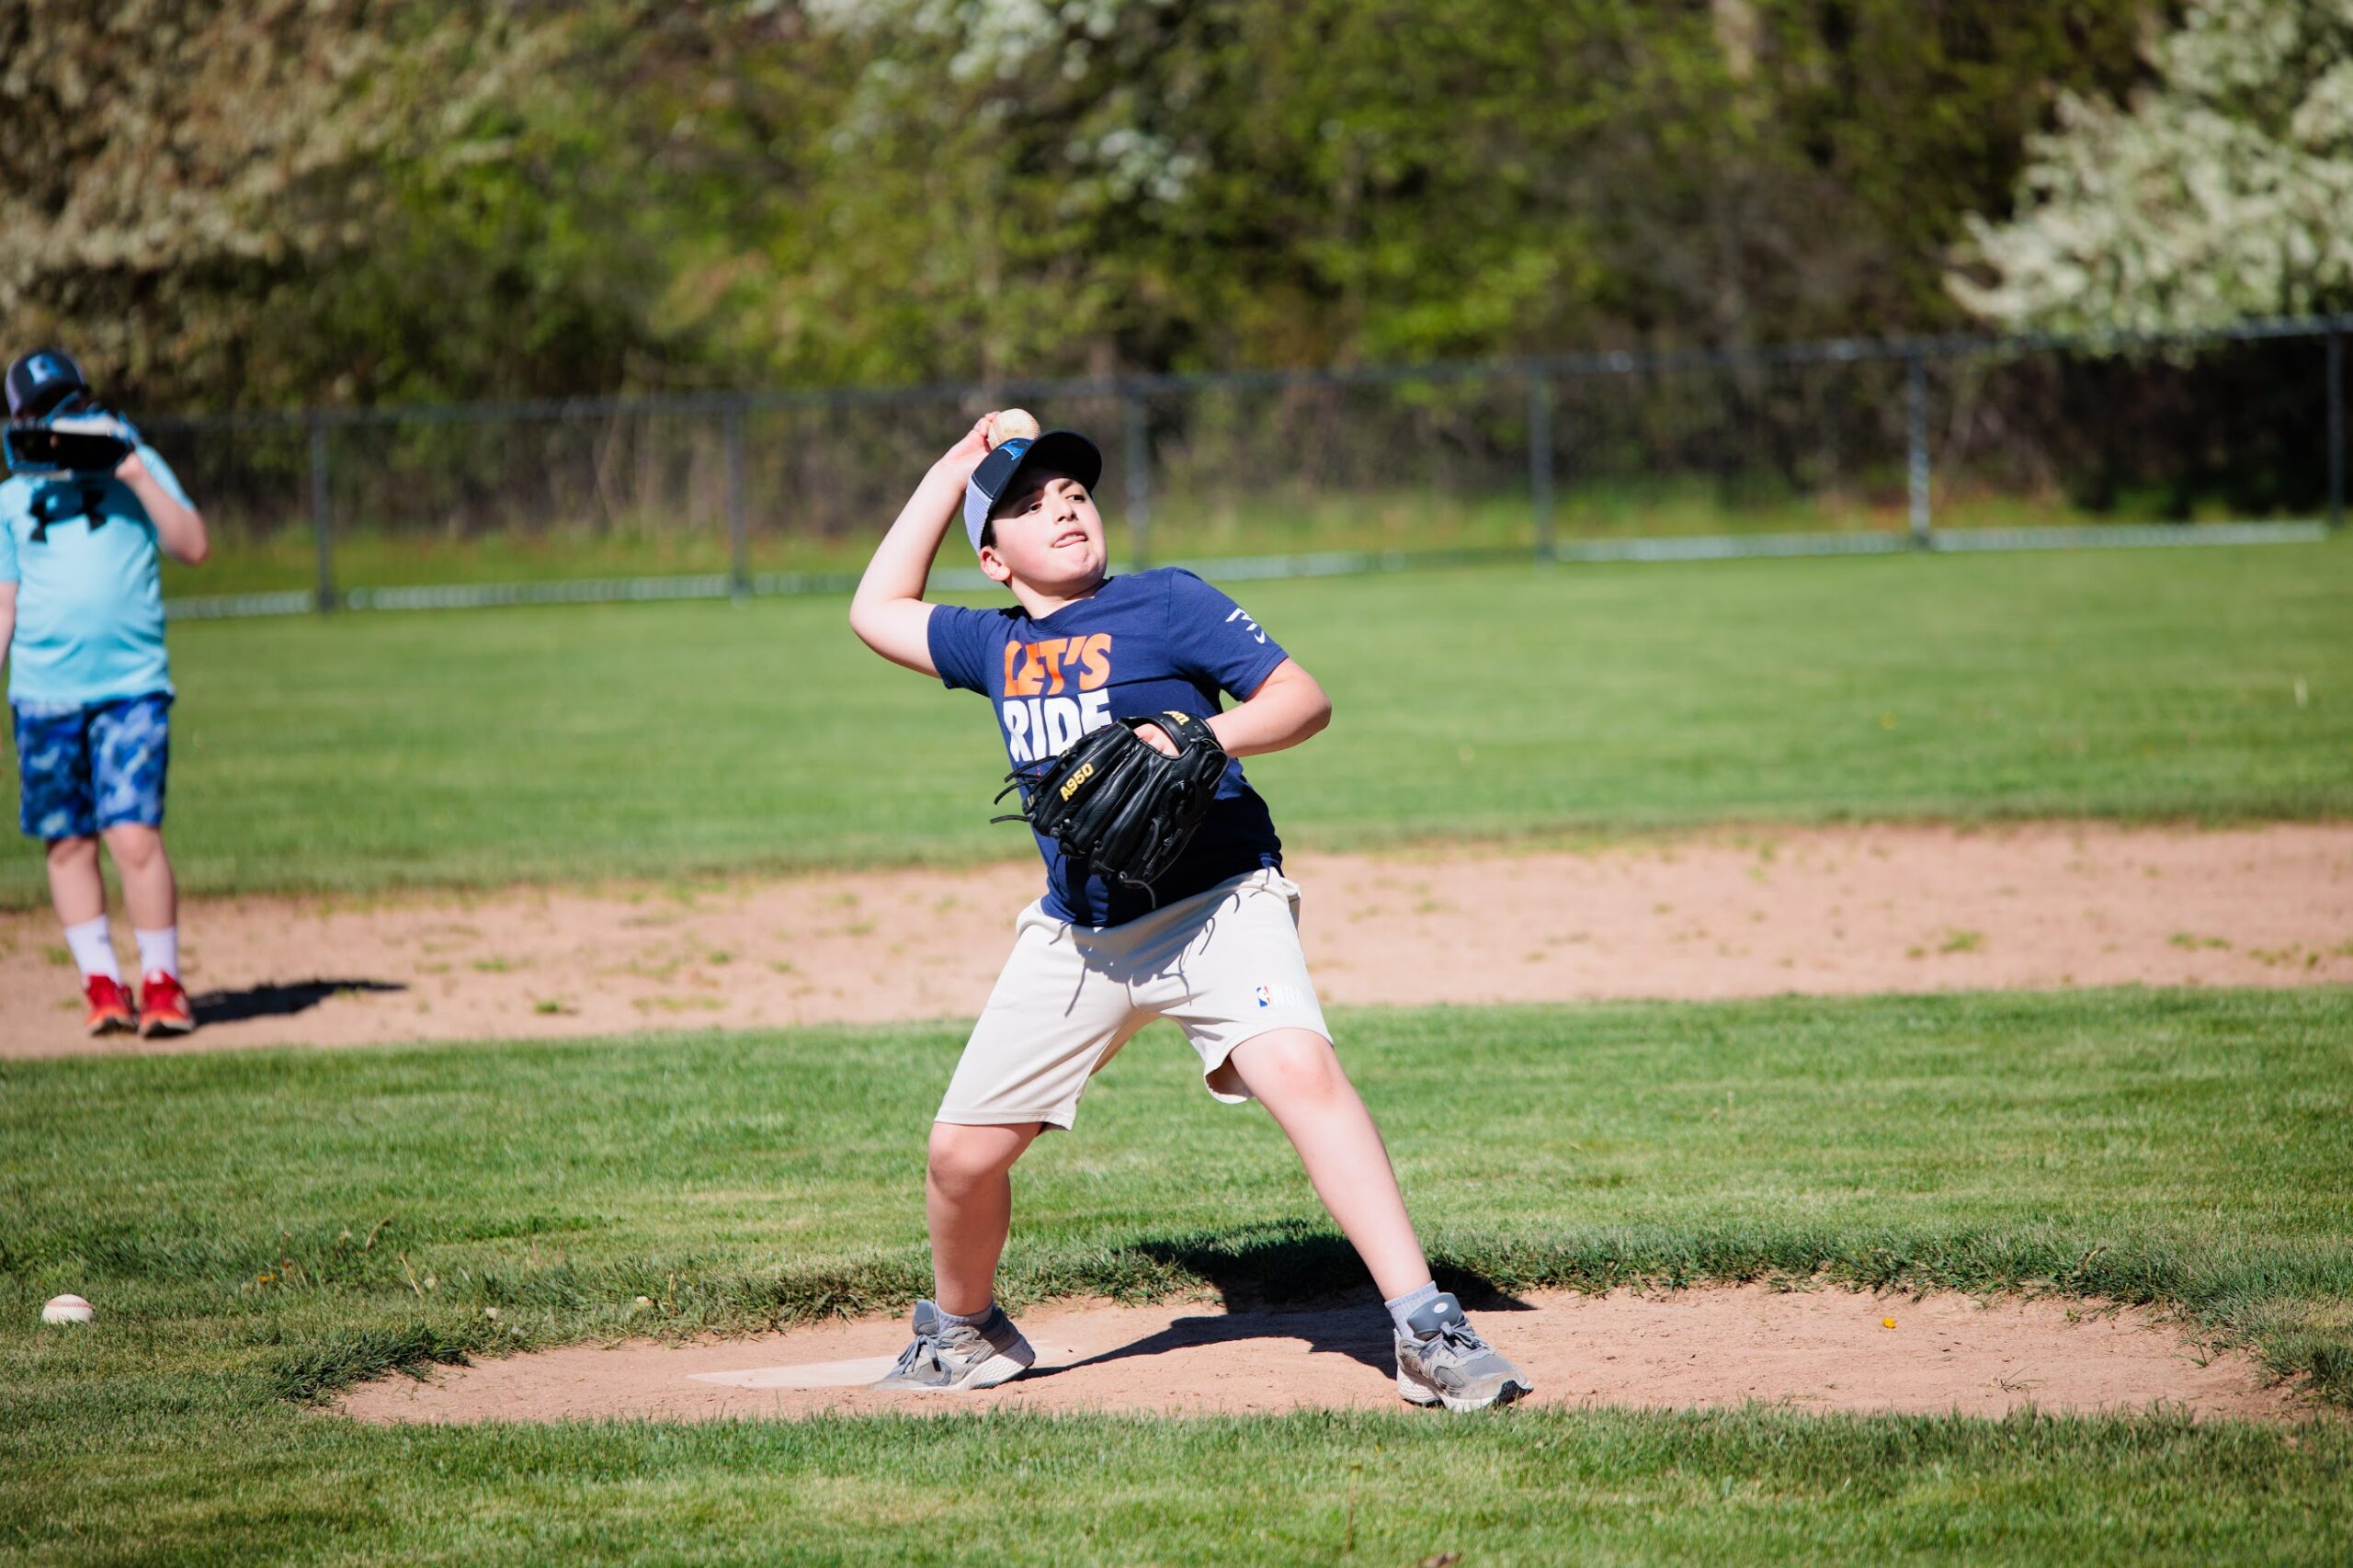 Elementary school student pitches during baseball practice at school